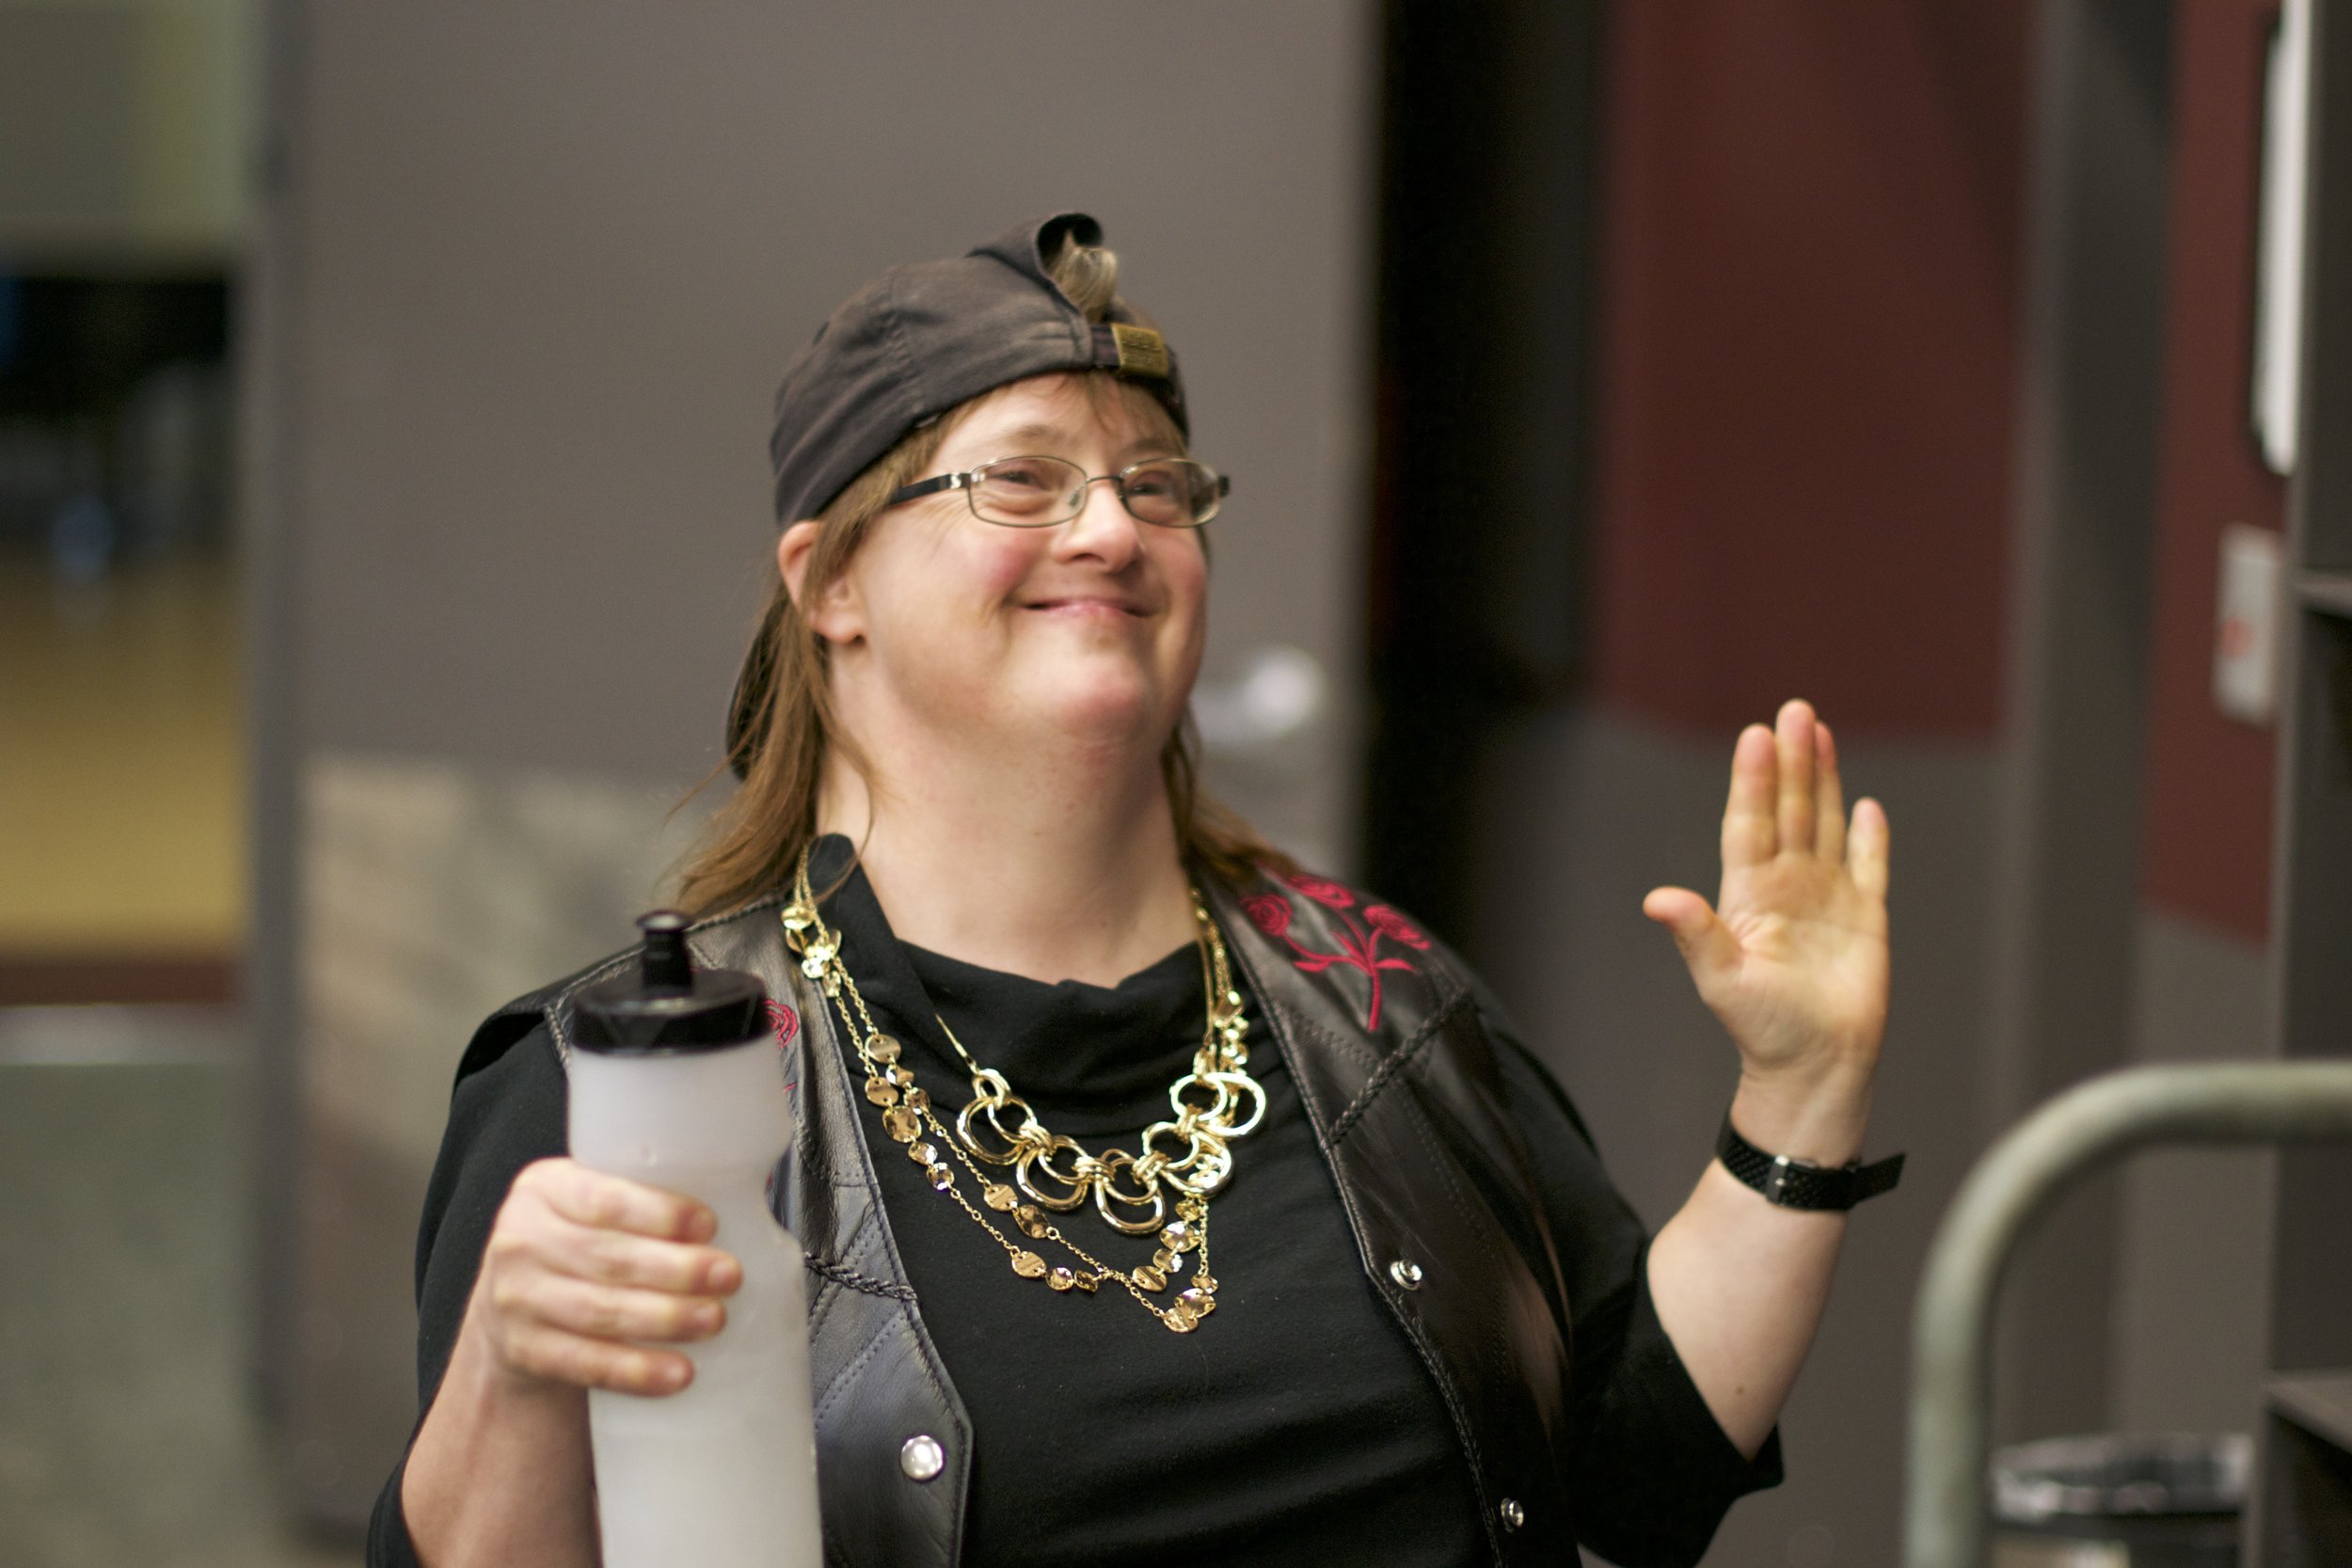 Smiling woman wearing backwards cap and gold necklace, holds a coffee cup and raises the other hand